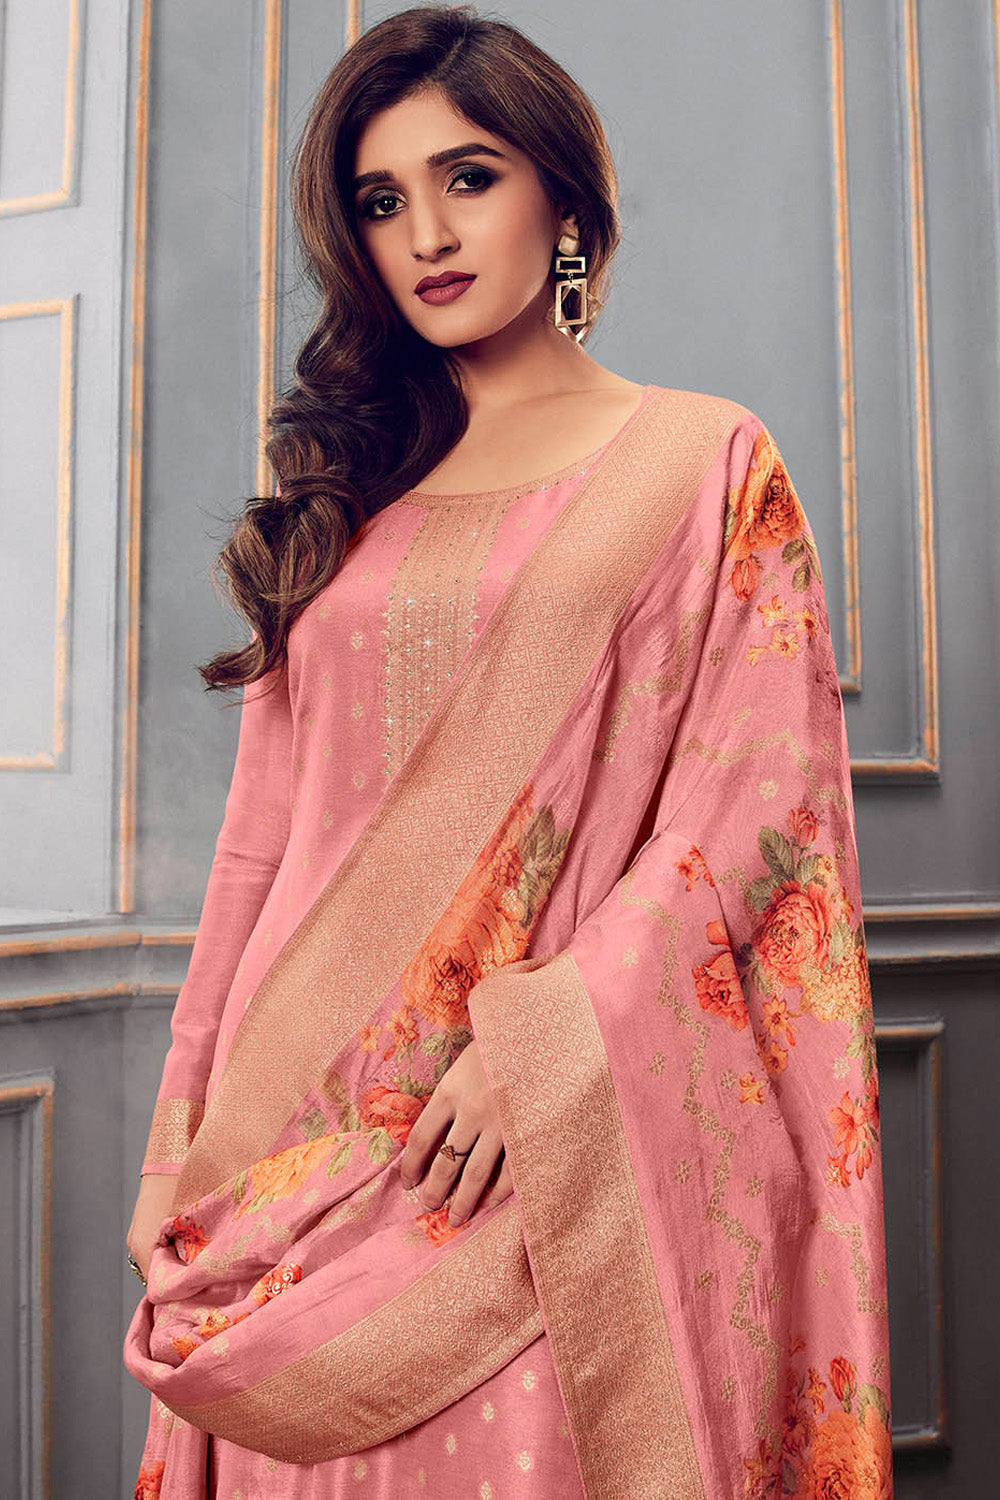 Peach Color Silk Swarovski Work Woven Unstitched Suit Material